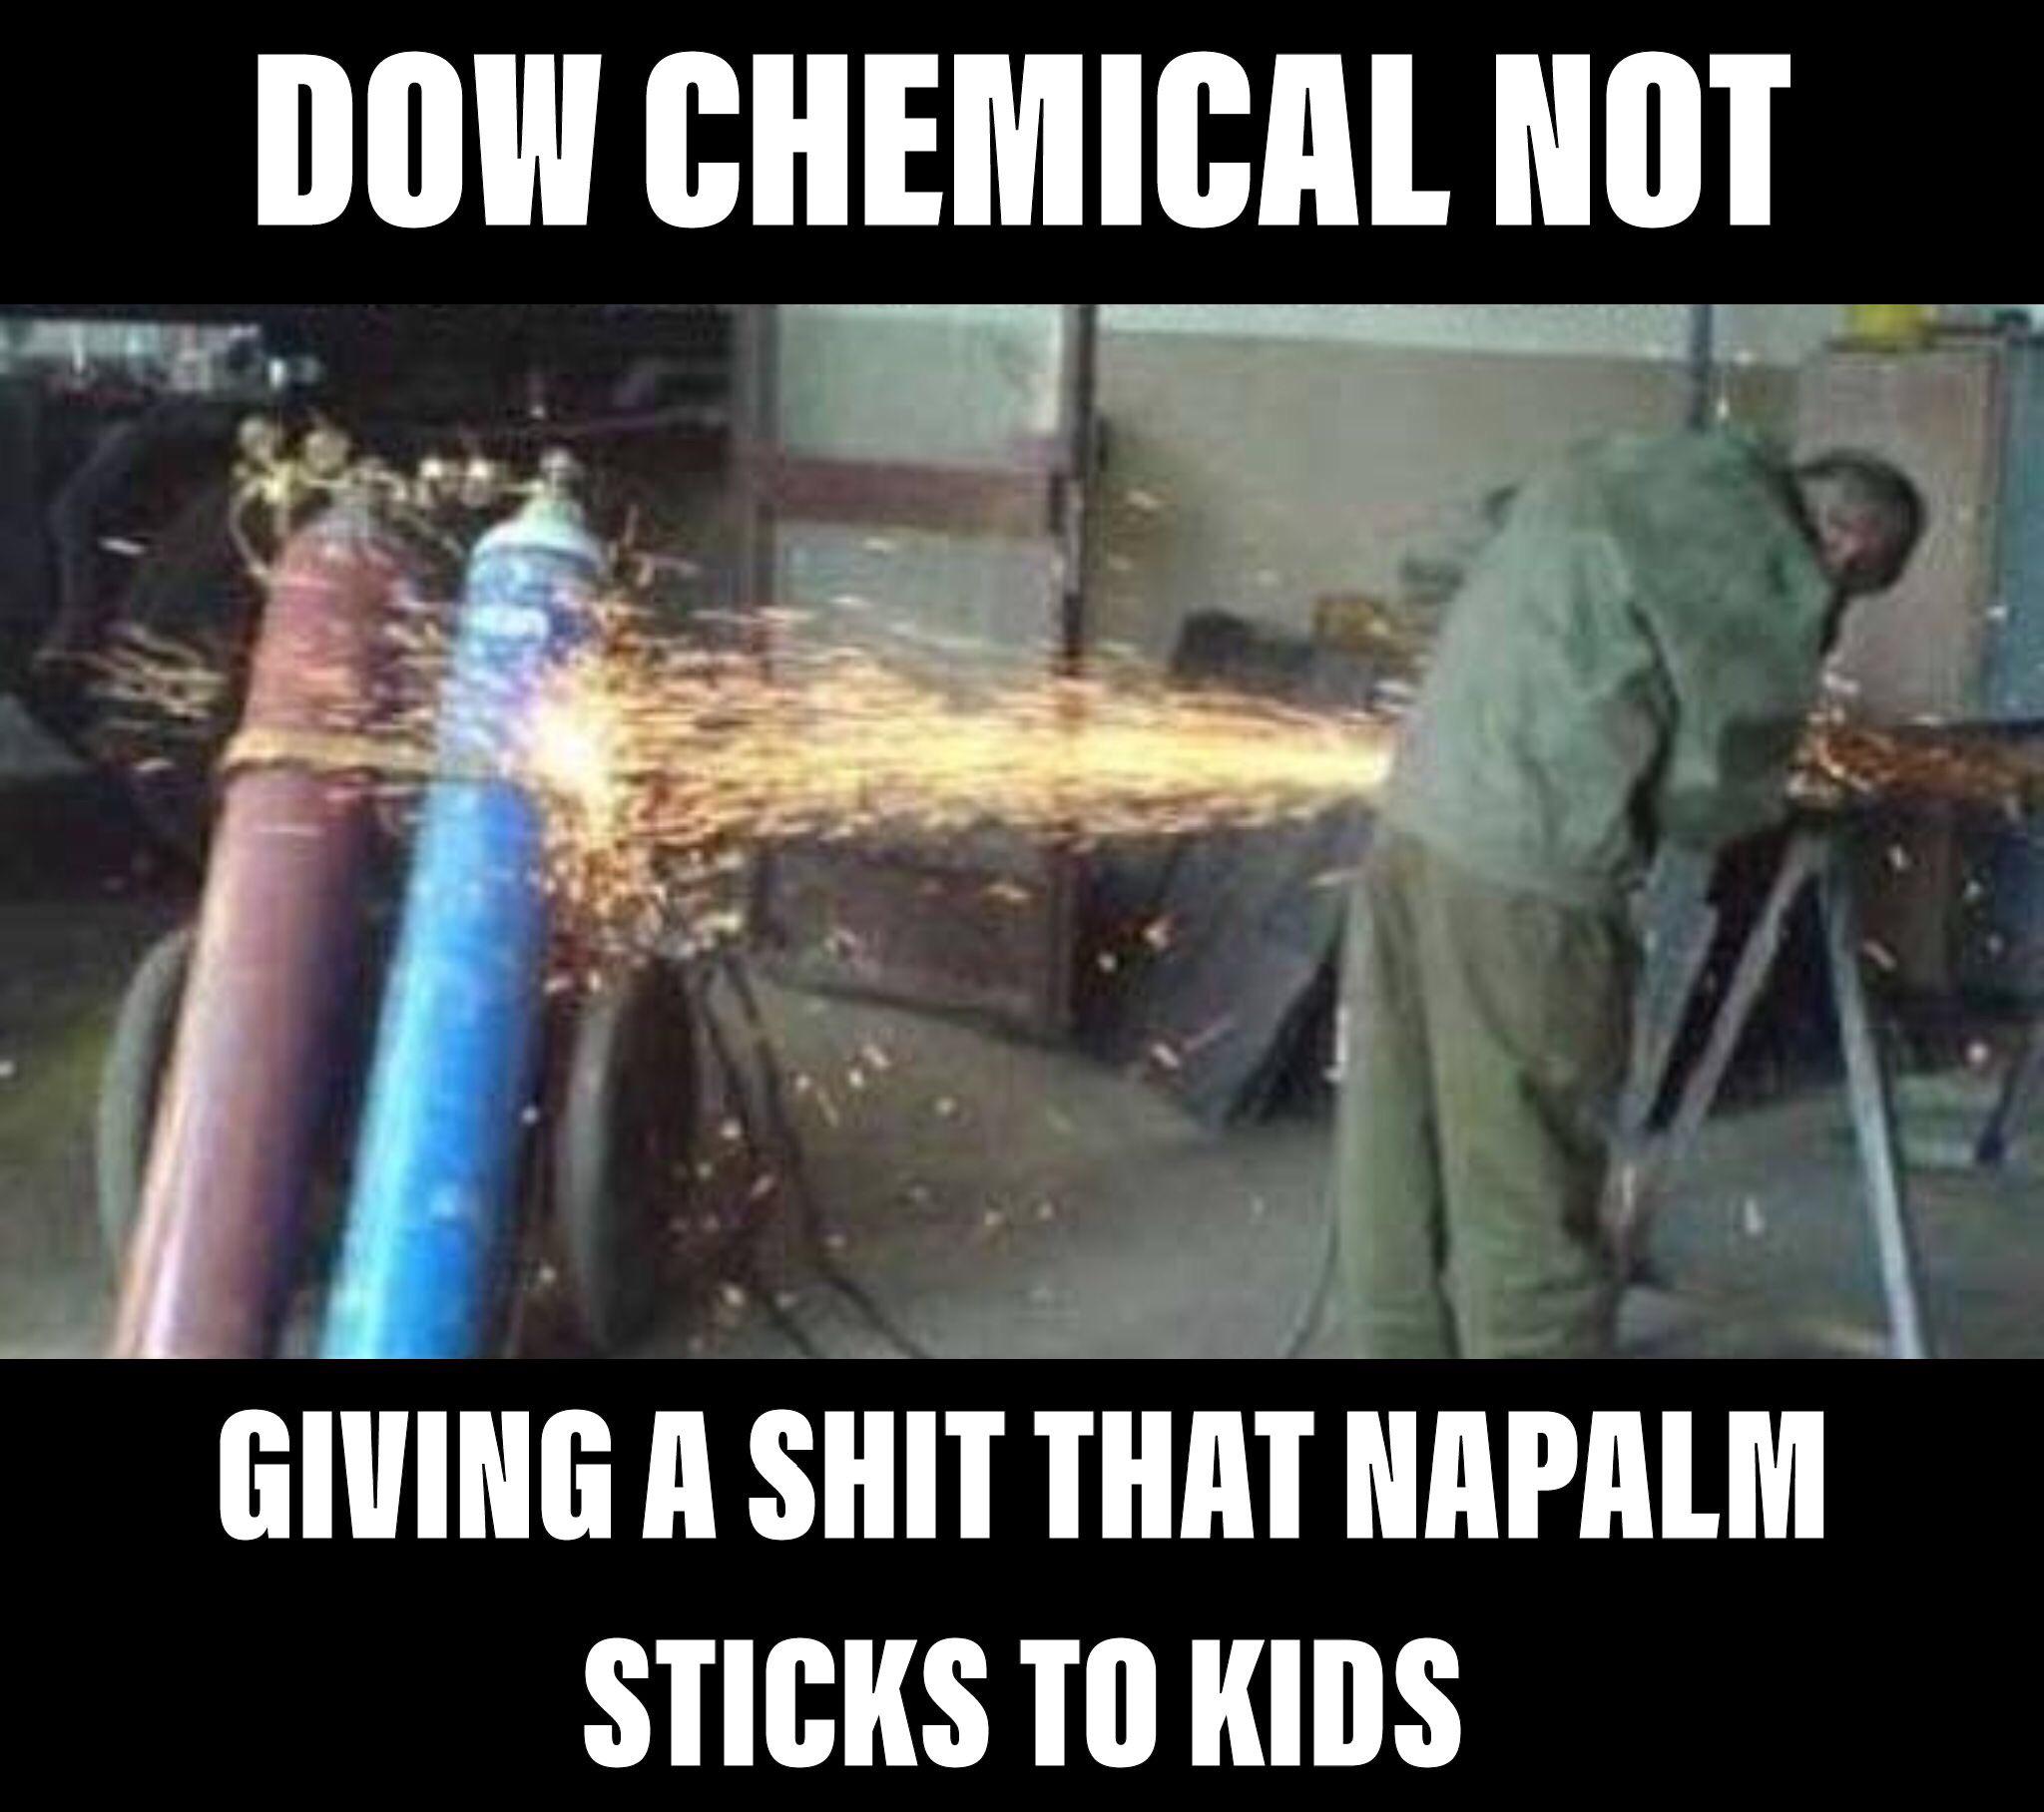 history history-memes history text: DOW CHEMICAL NOT GIVING A THAT NAPALM STICKS TO KIDS 